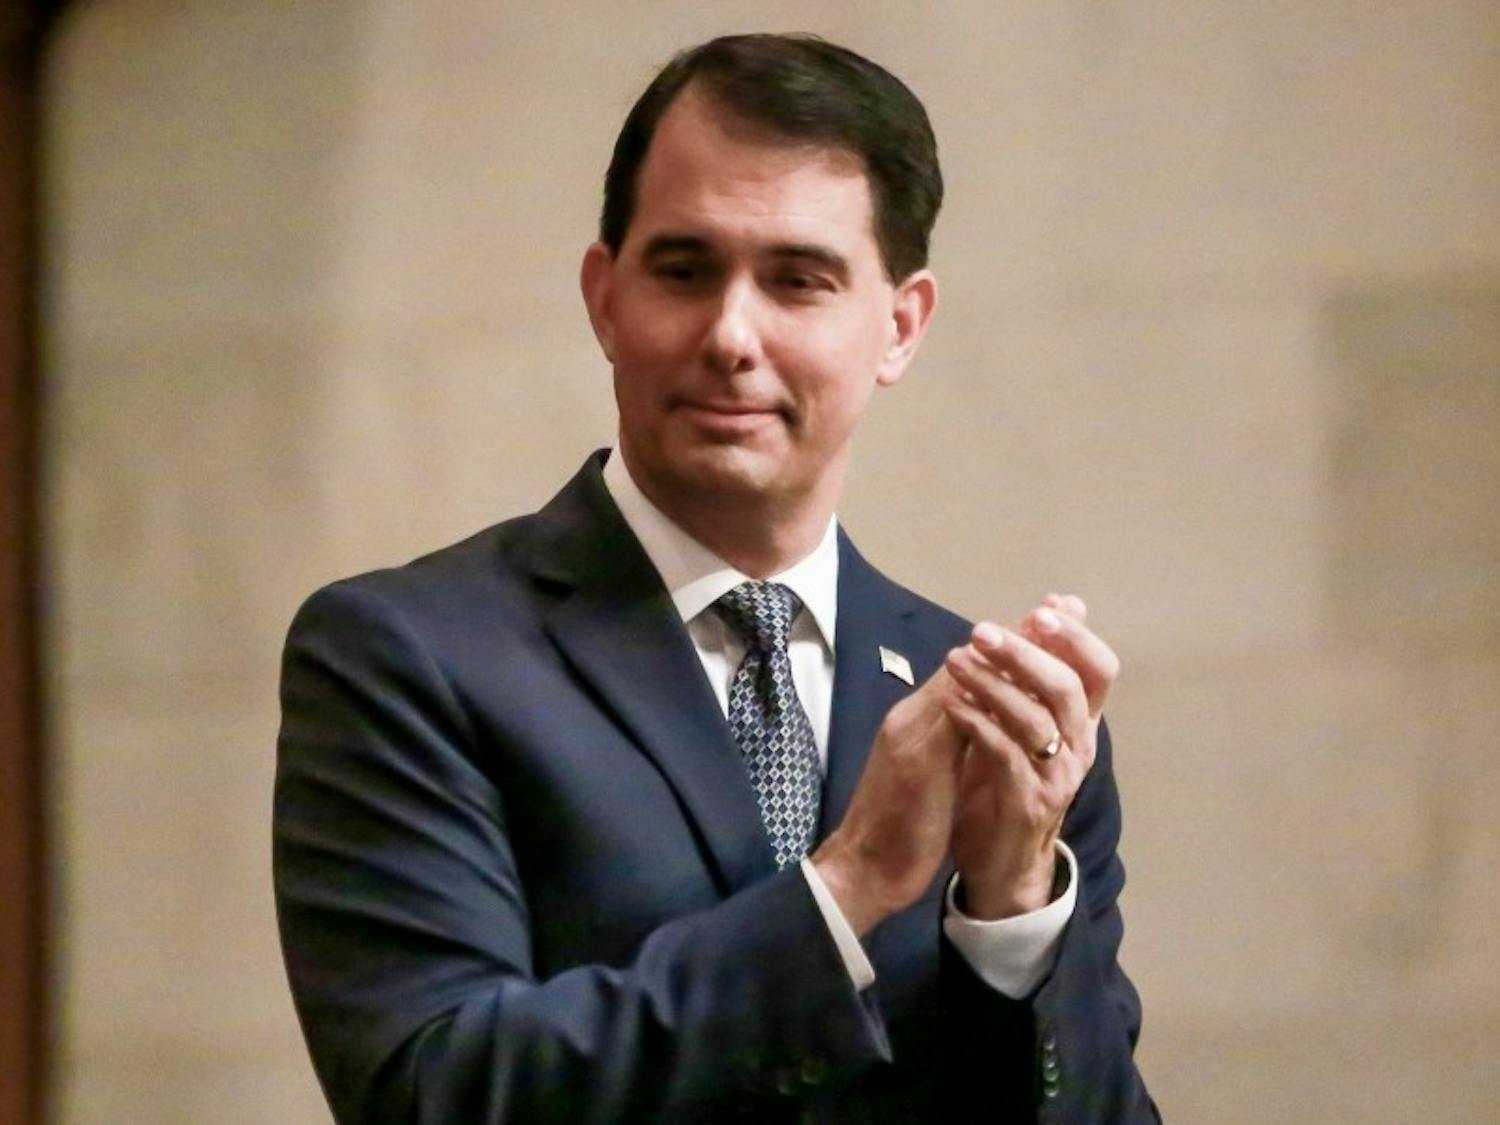 A budget fight between Gov. Scott Walker and Republican state legislators over transportation funding threatens to hurt party unity.